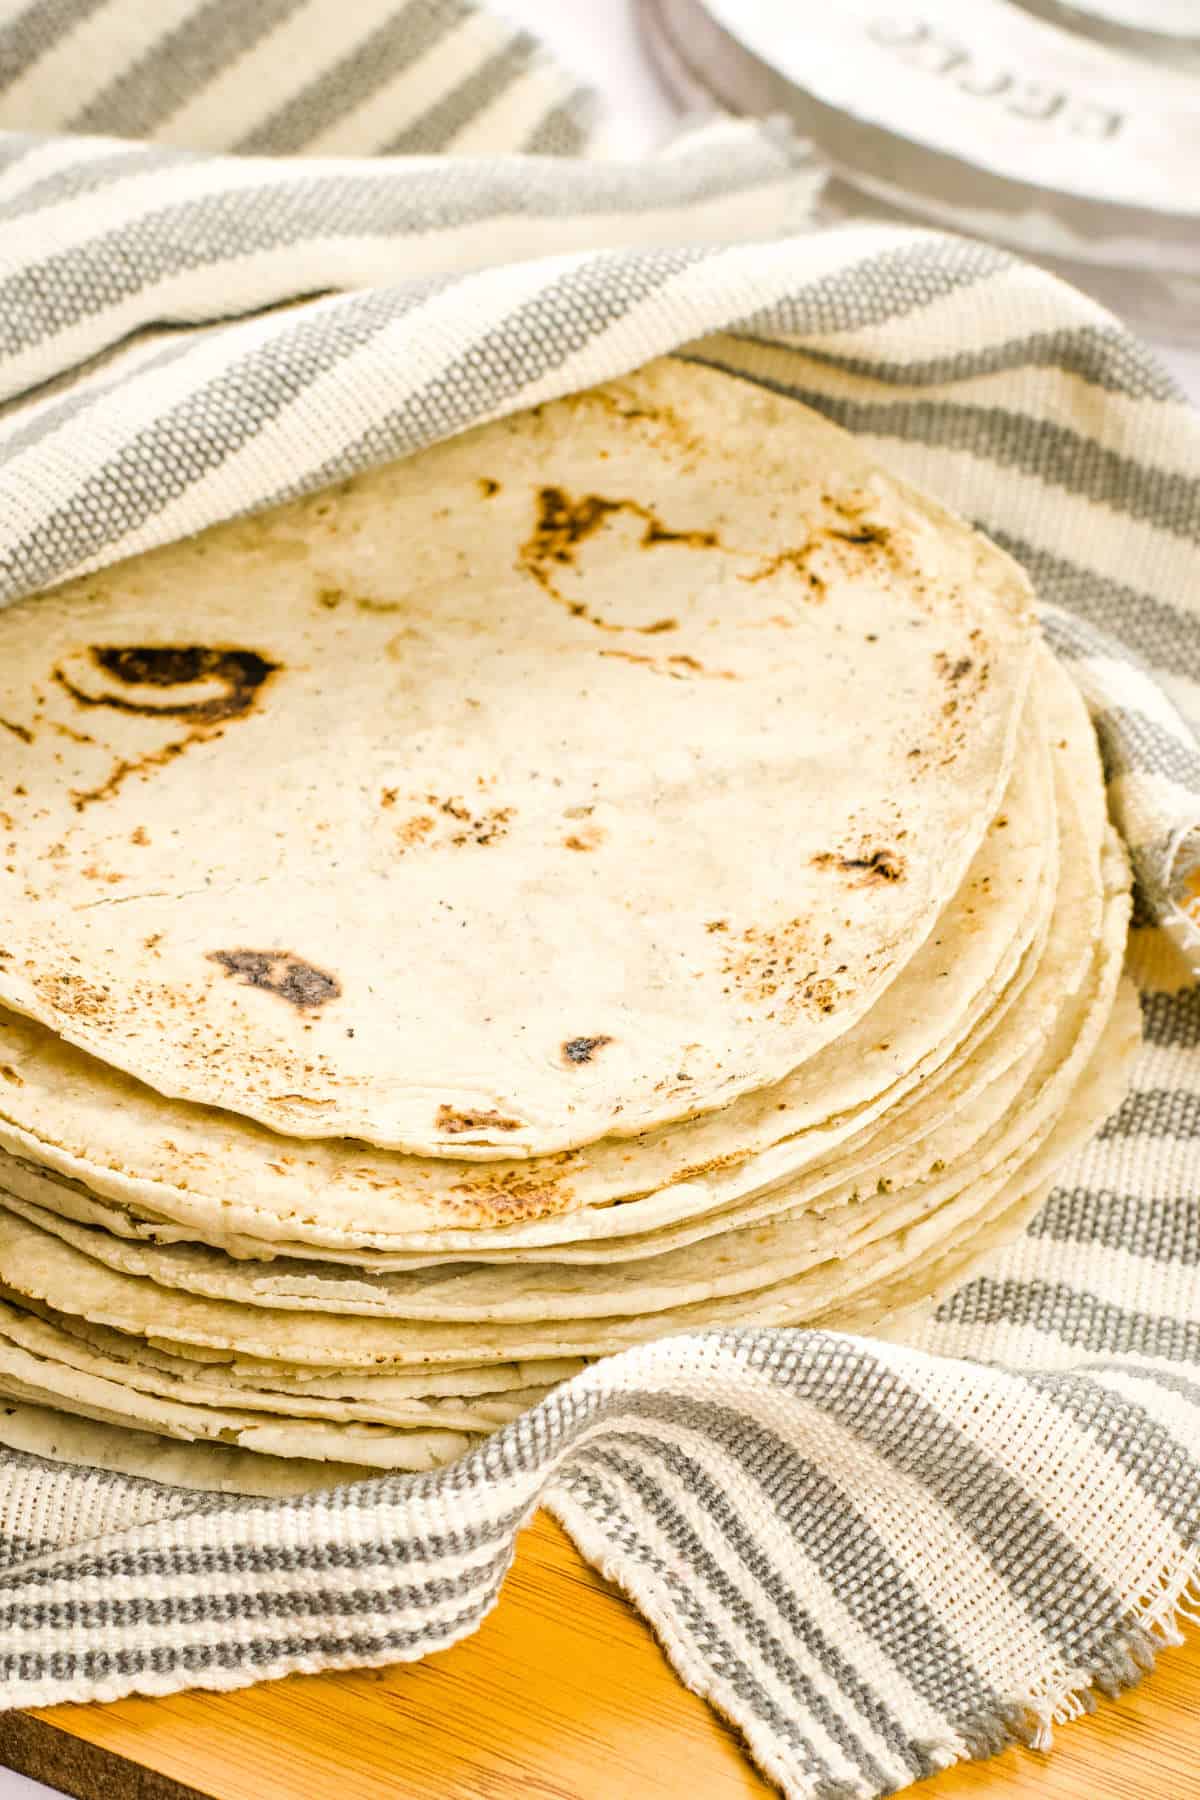 Stacked homemade tortillas partially wrapped in a grey and white striped cloth.